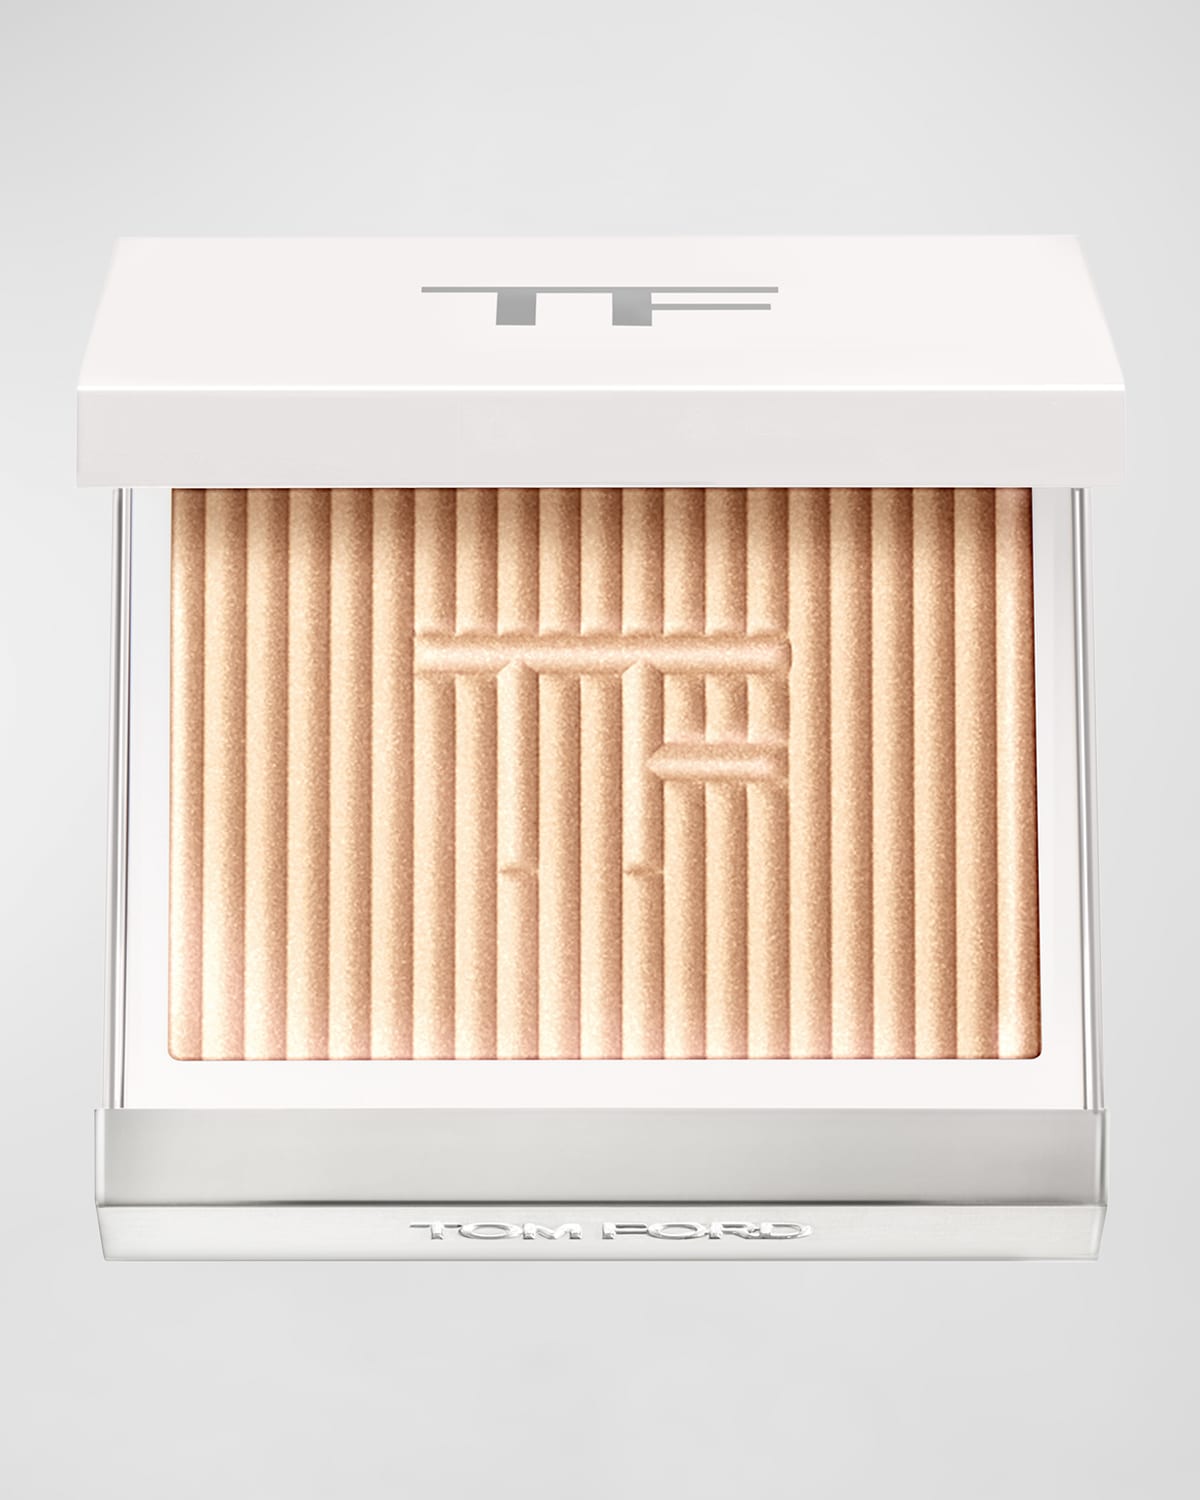 Tom Ford Glow Highlighter, 0.21 Oz. In White